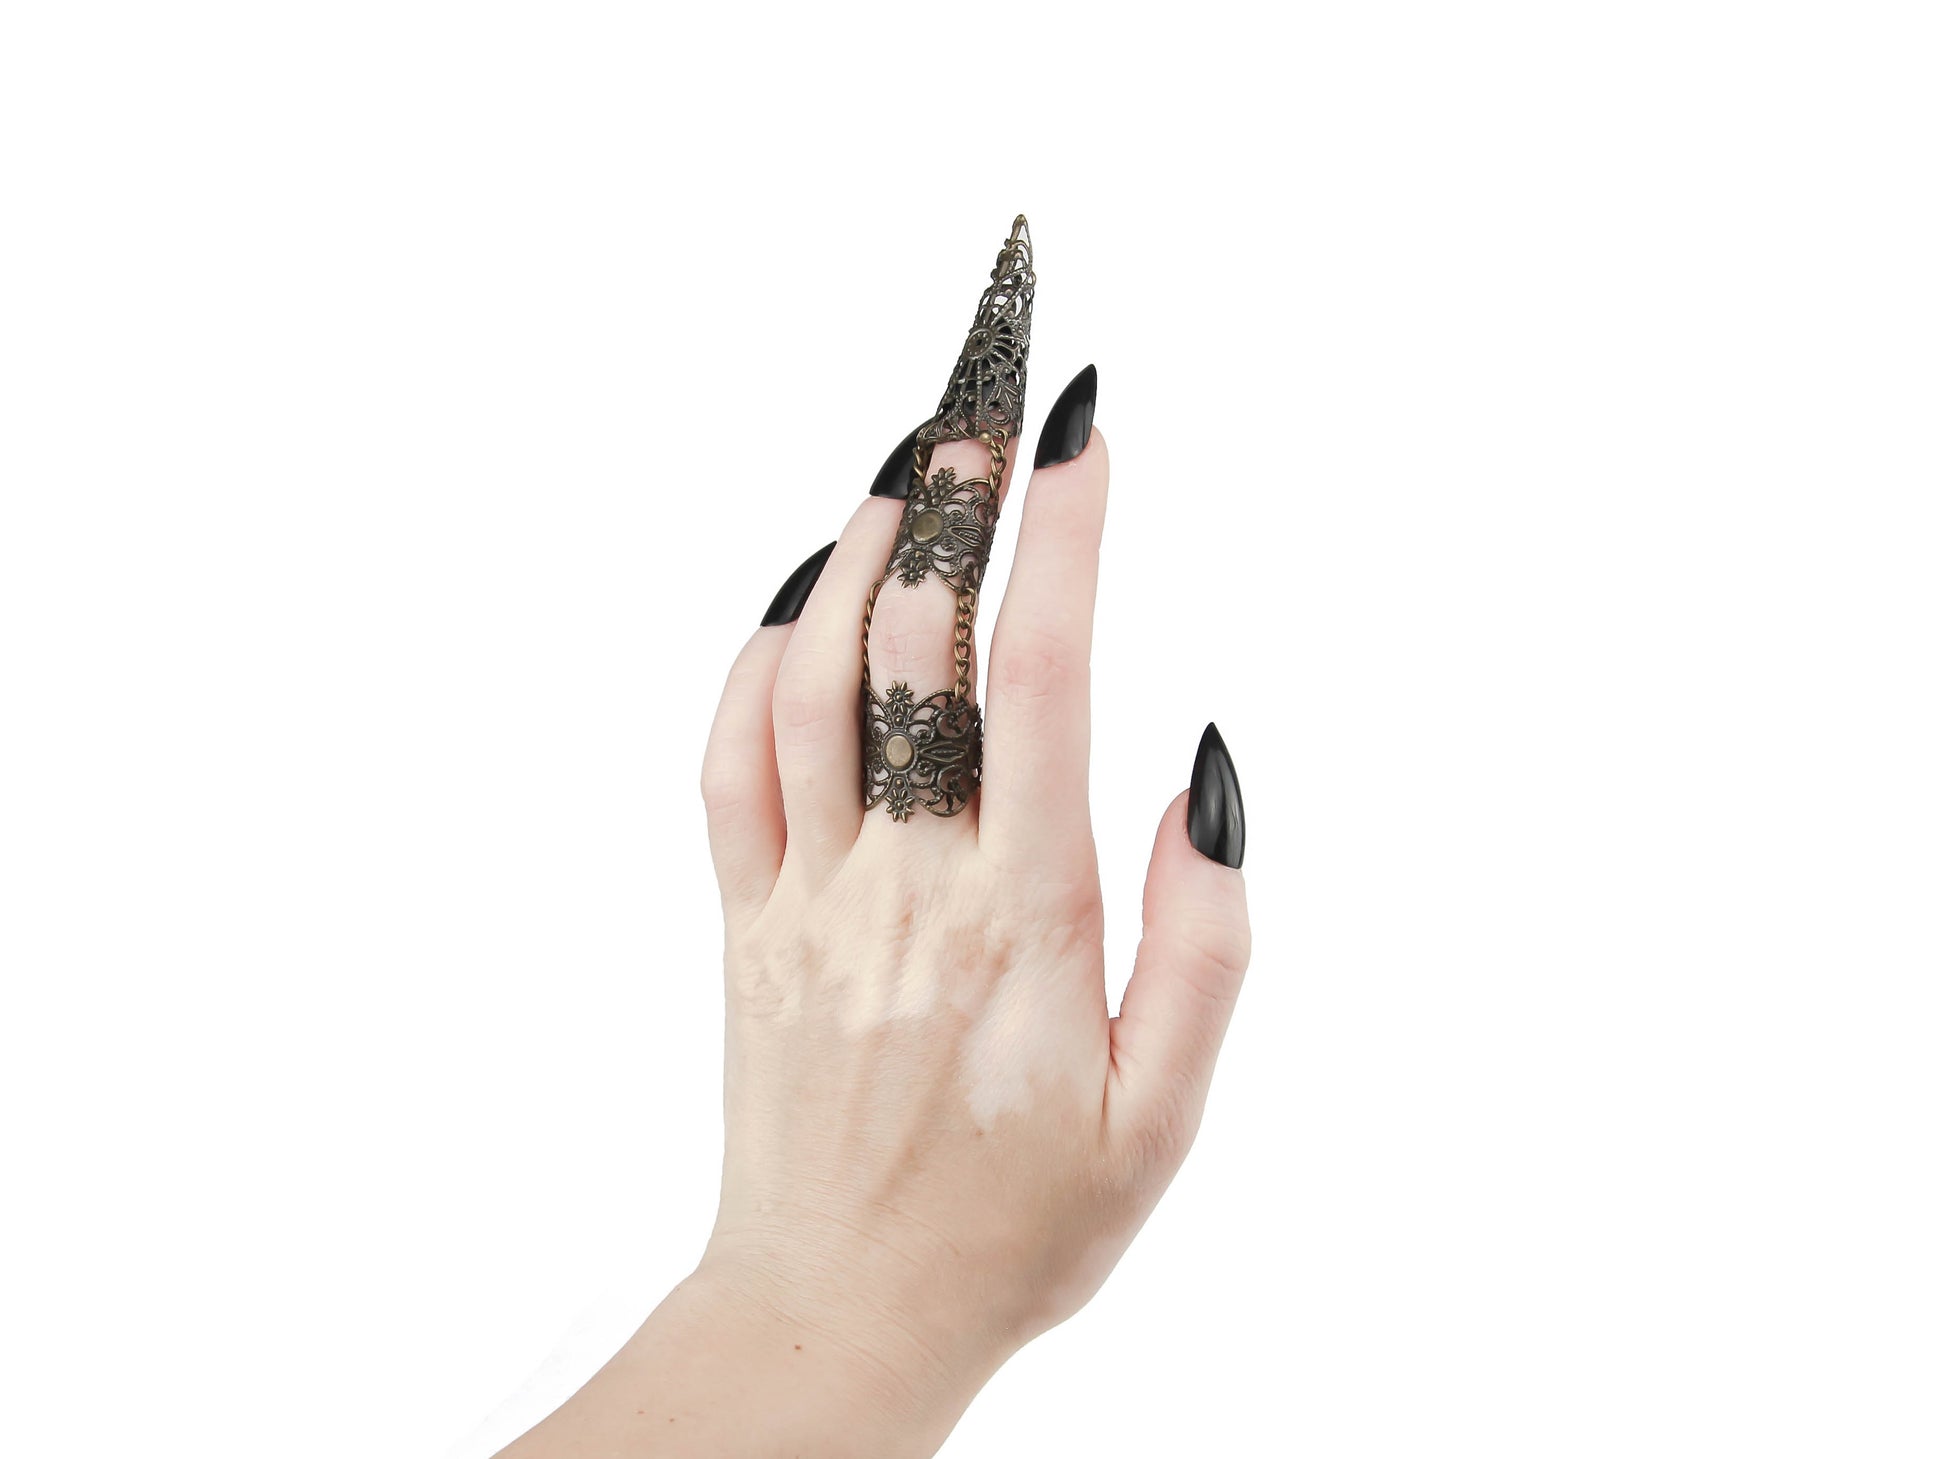 Experience the fusion of elegance and edge with Myril Jewels' handcrafted bronze claw ring, a statement piece for the dark-avantgarde enthusiast. This unique armor-like ring with a claw design is perfectly tailored for the middle finger, crafted to complement a range of styles from Gothic Lolita to Witchcore. Ideal for Halloween Jewelry collections, its bold aesthetic also suits everyday wear for those who embody the minimal goth spirit